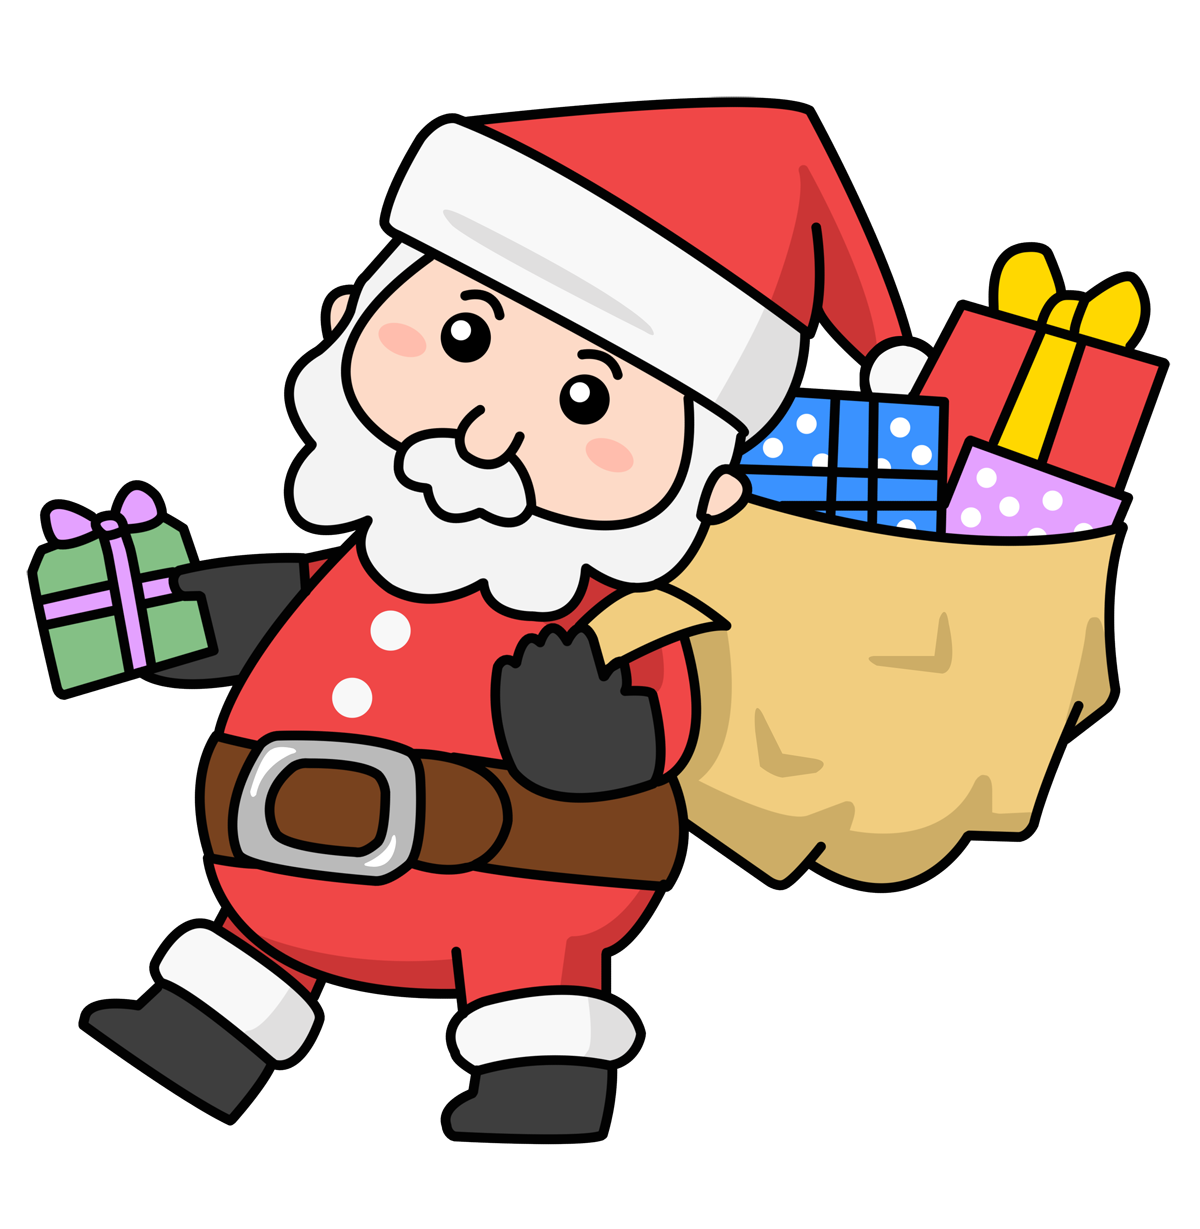 This cute cartoon Santa Claus clip art is perfect for use on your Christmas related projects like comic books, scrapbooks, e-cards, websites and blogs, ...